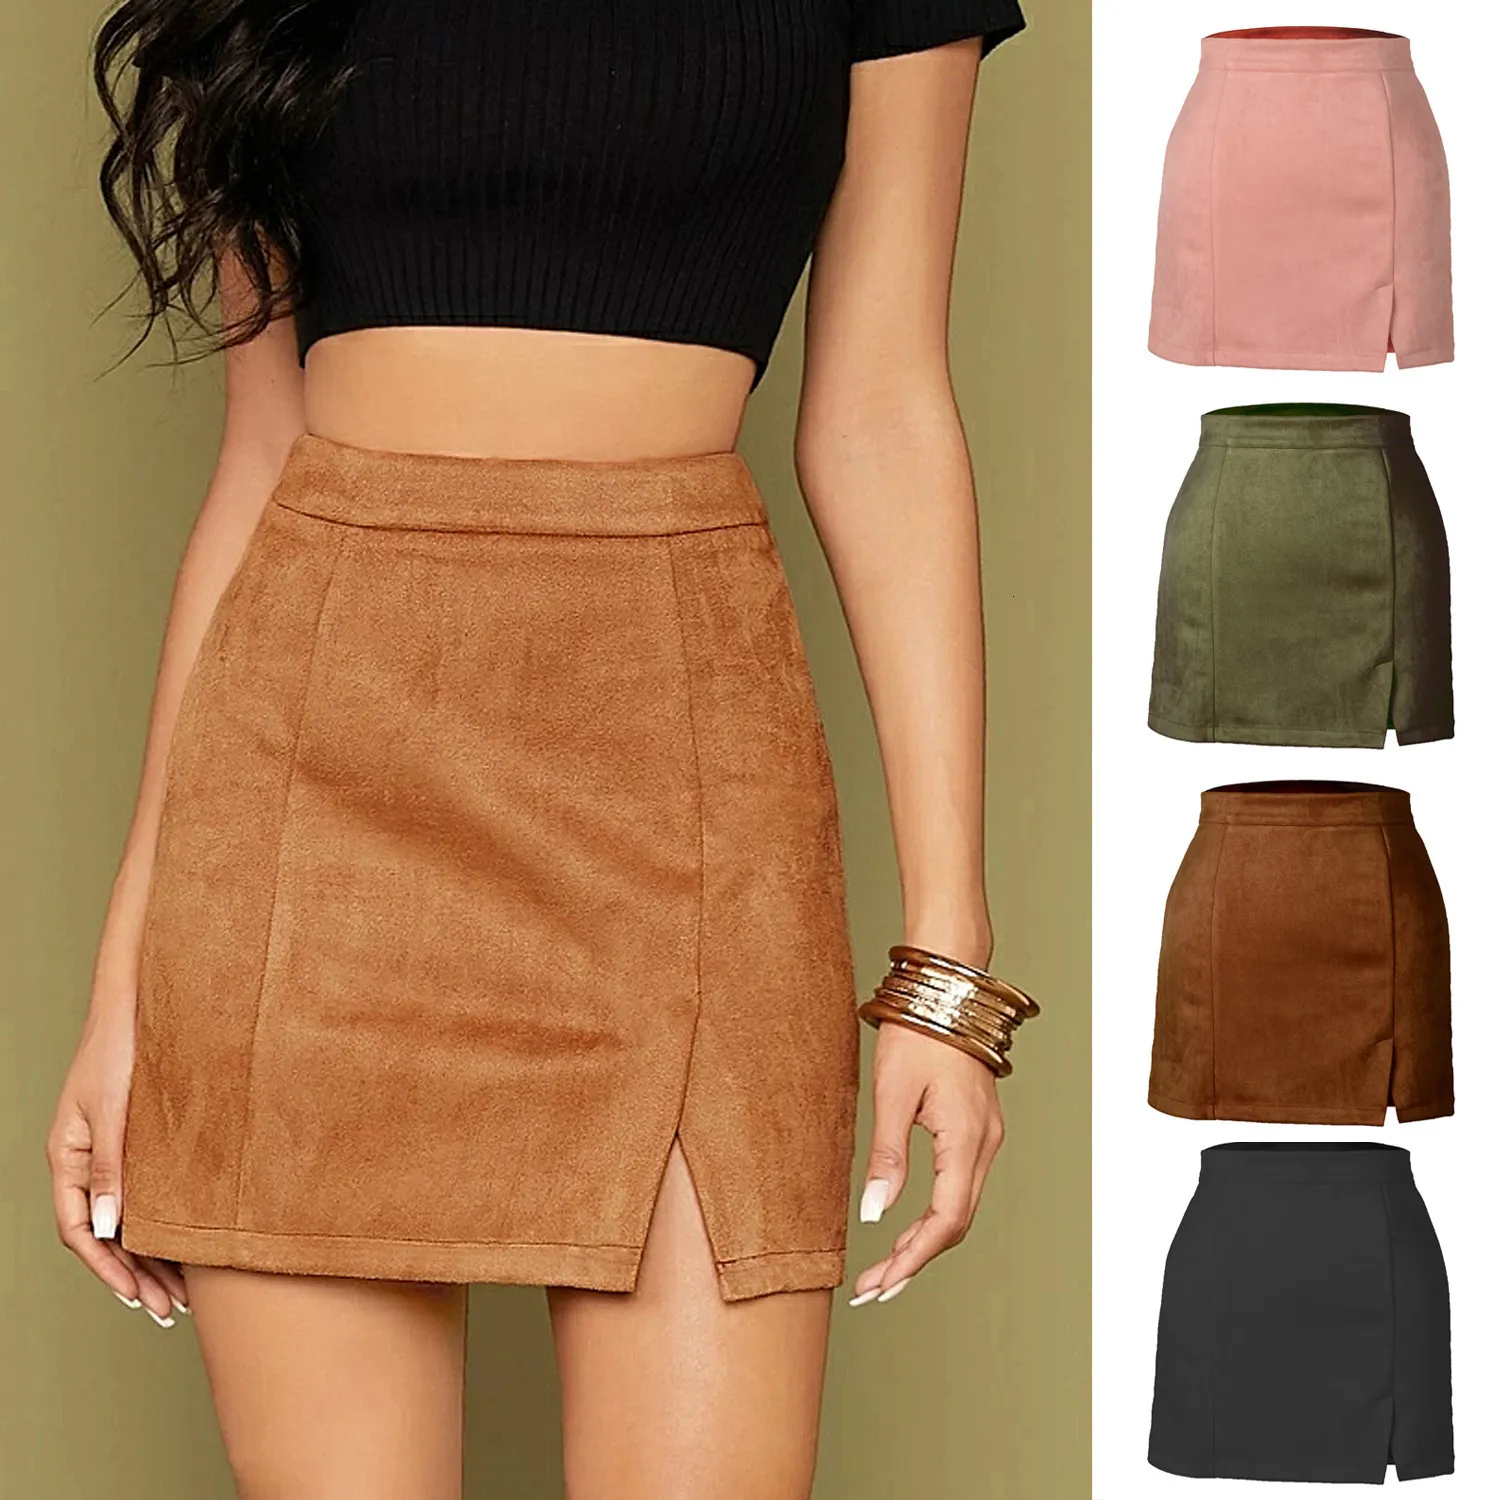 Skirts Autumn and Winter Women's Suede Bag Hip Skirt High Waist Skirts with Zipper A-line Solid Colors Jupe Taille Haute 230506